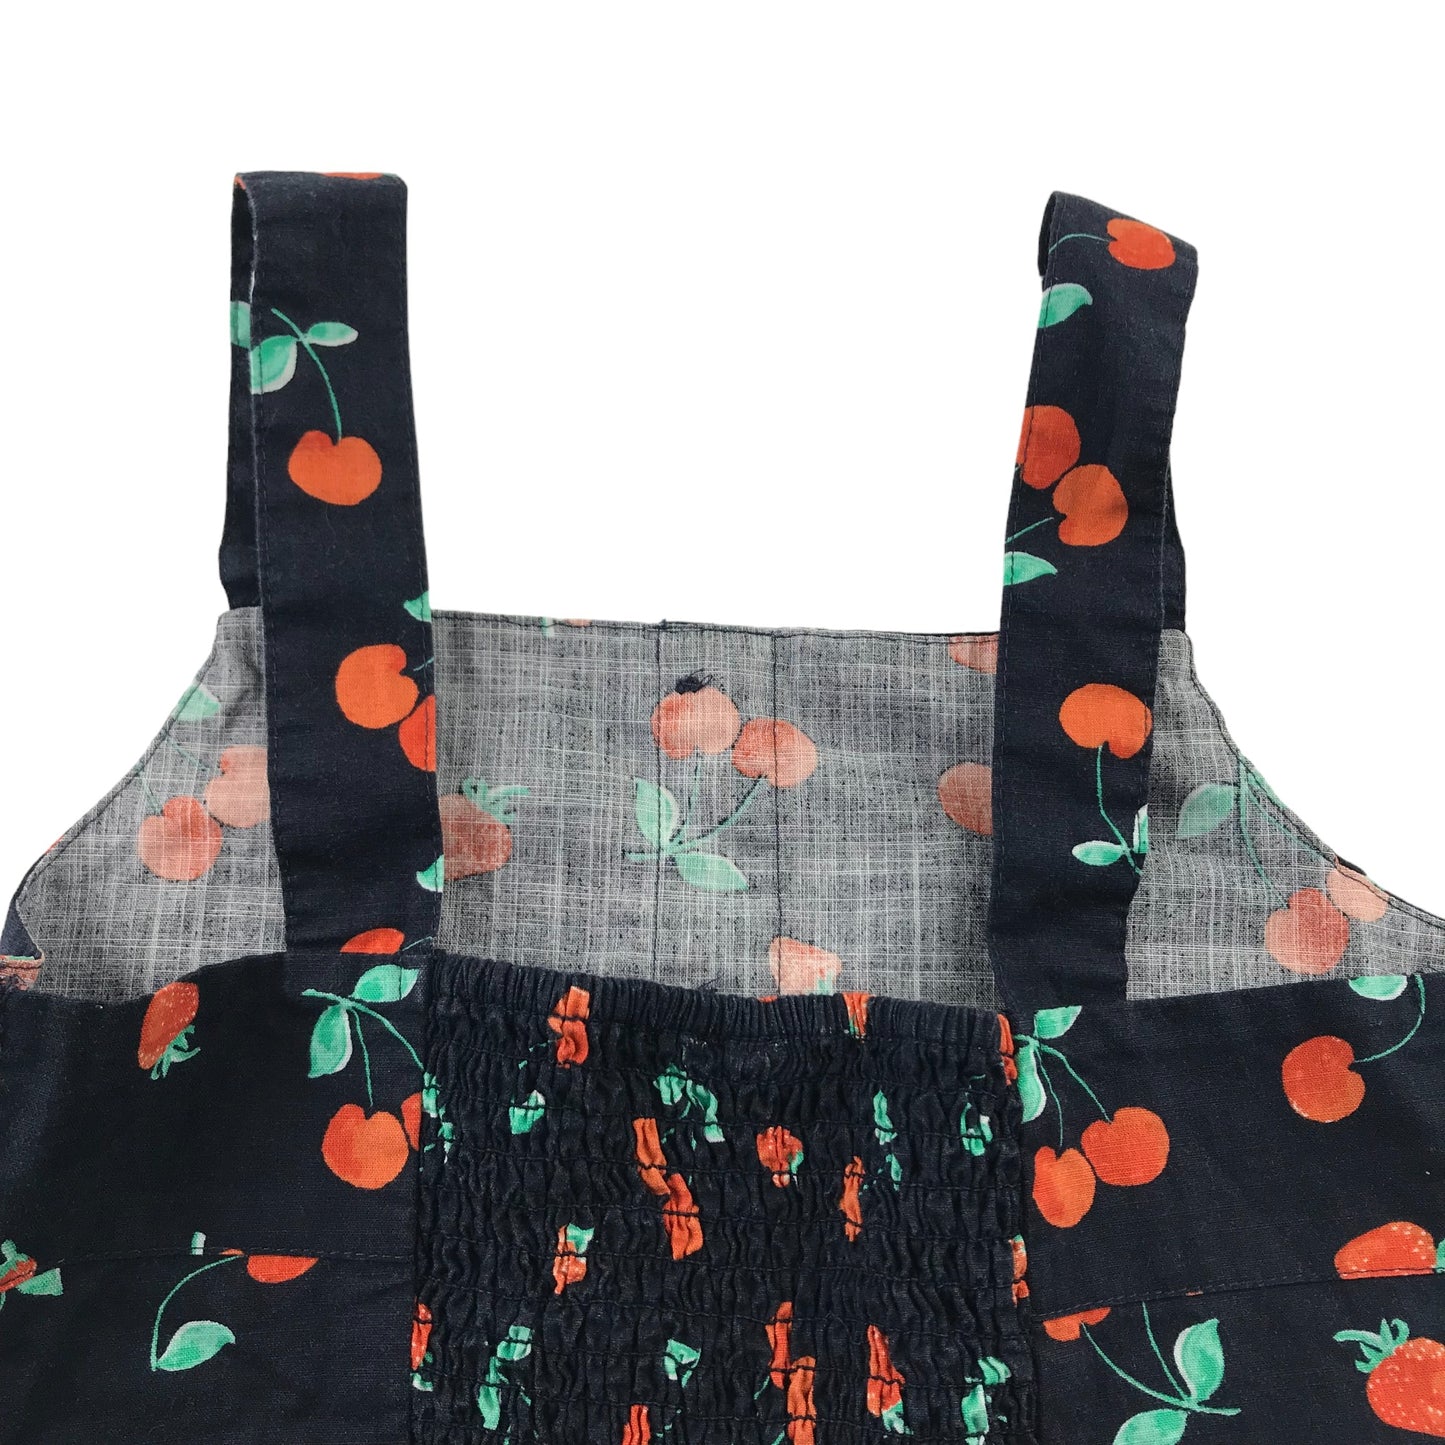 Next Top and Shorts Set Age 8 Dark Navy Strawberry and Cherry Print Pattern Cotton